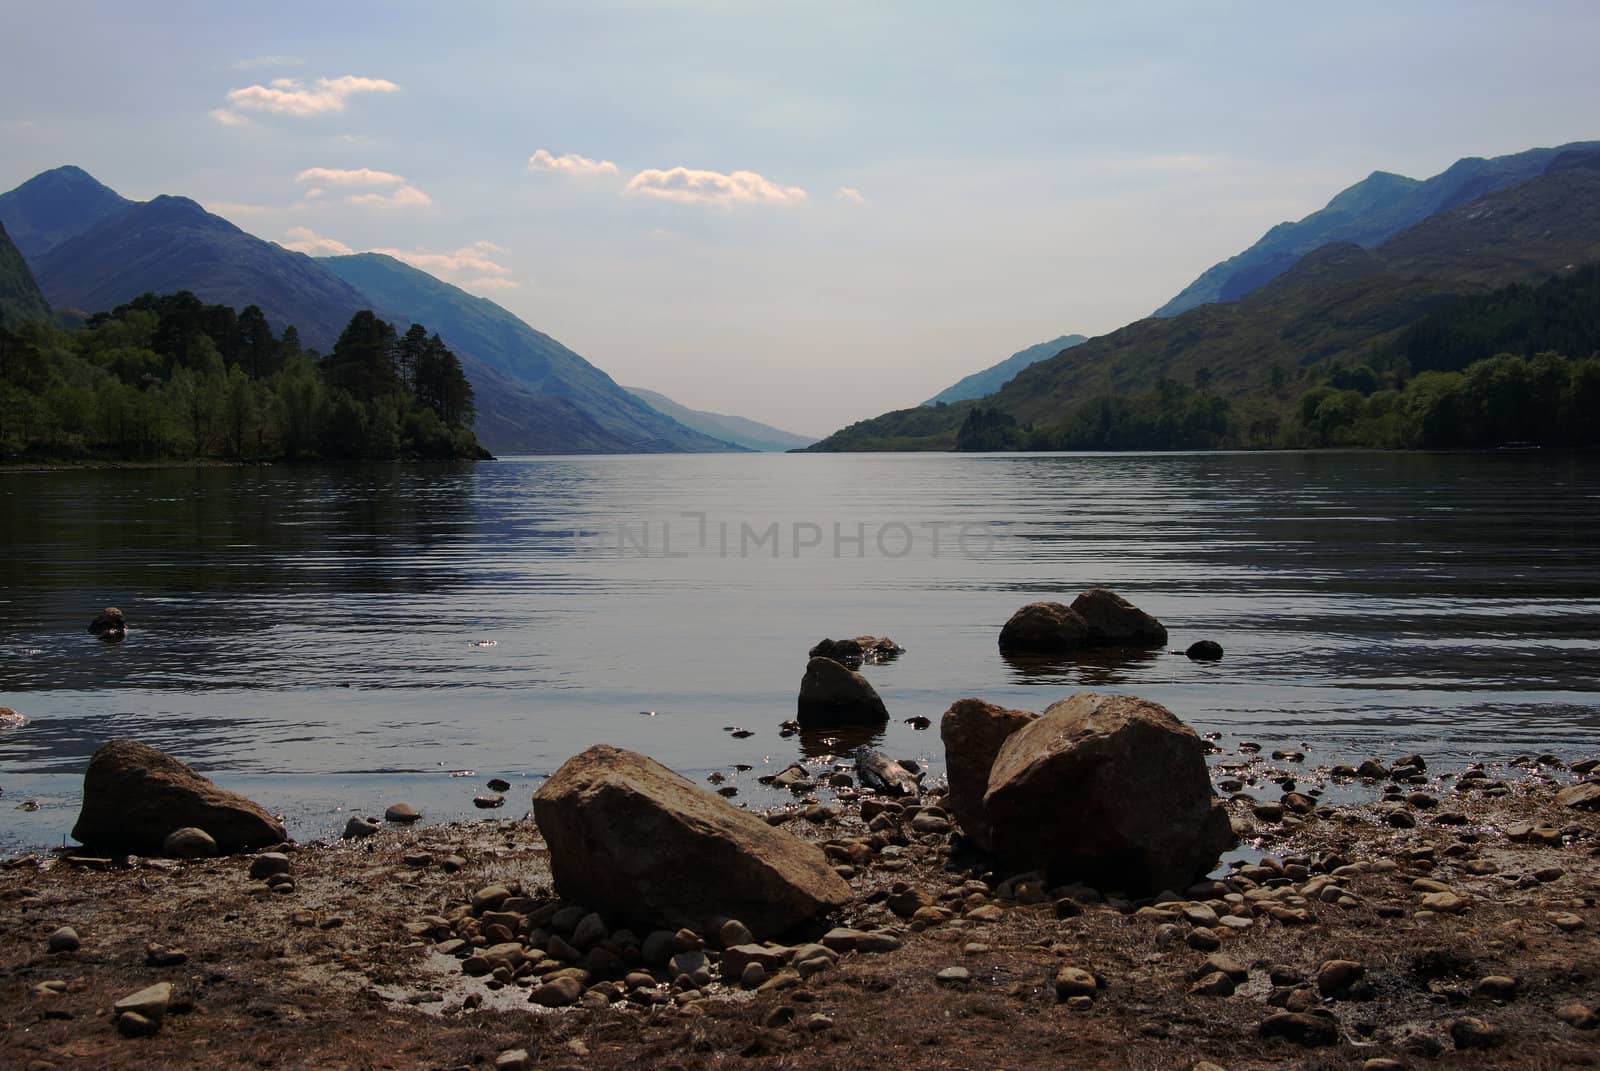 looking out over the lake Loch Shiel from Glenfinnan